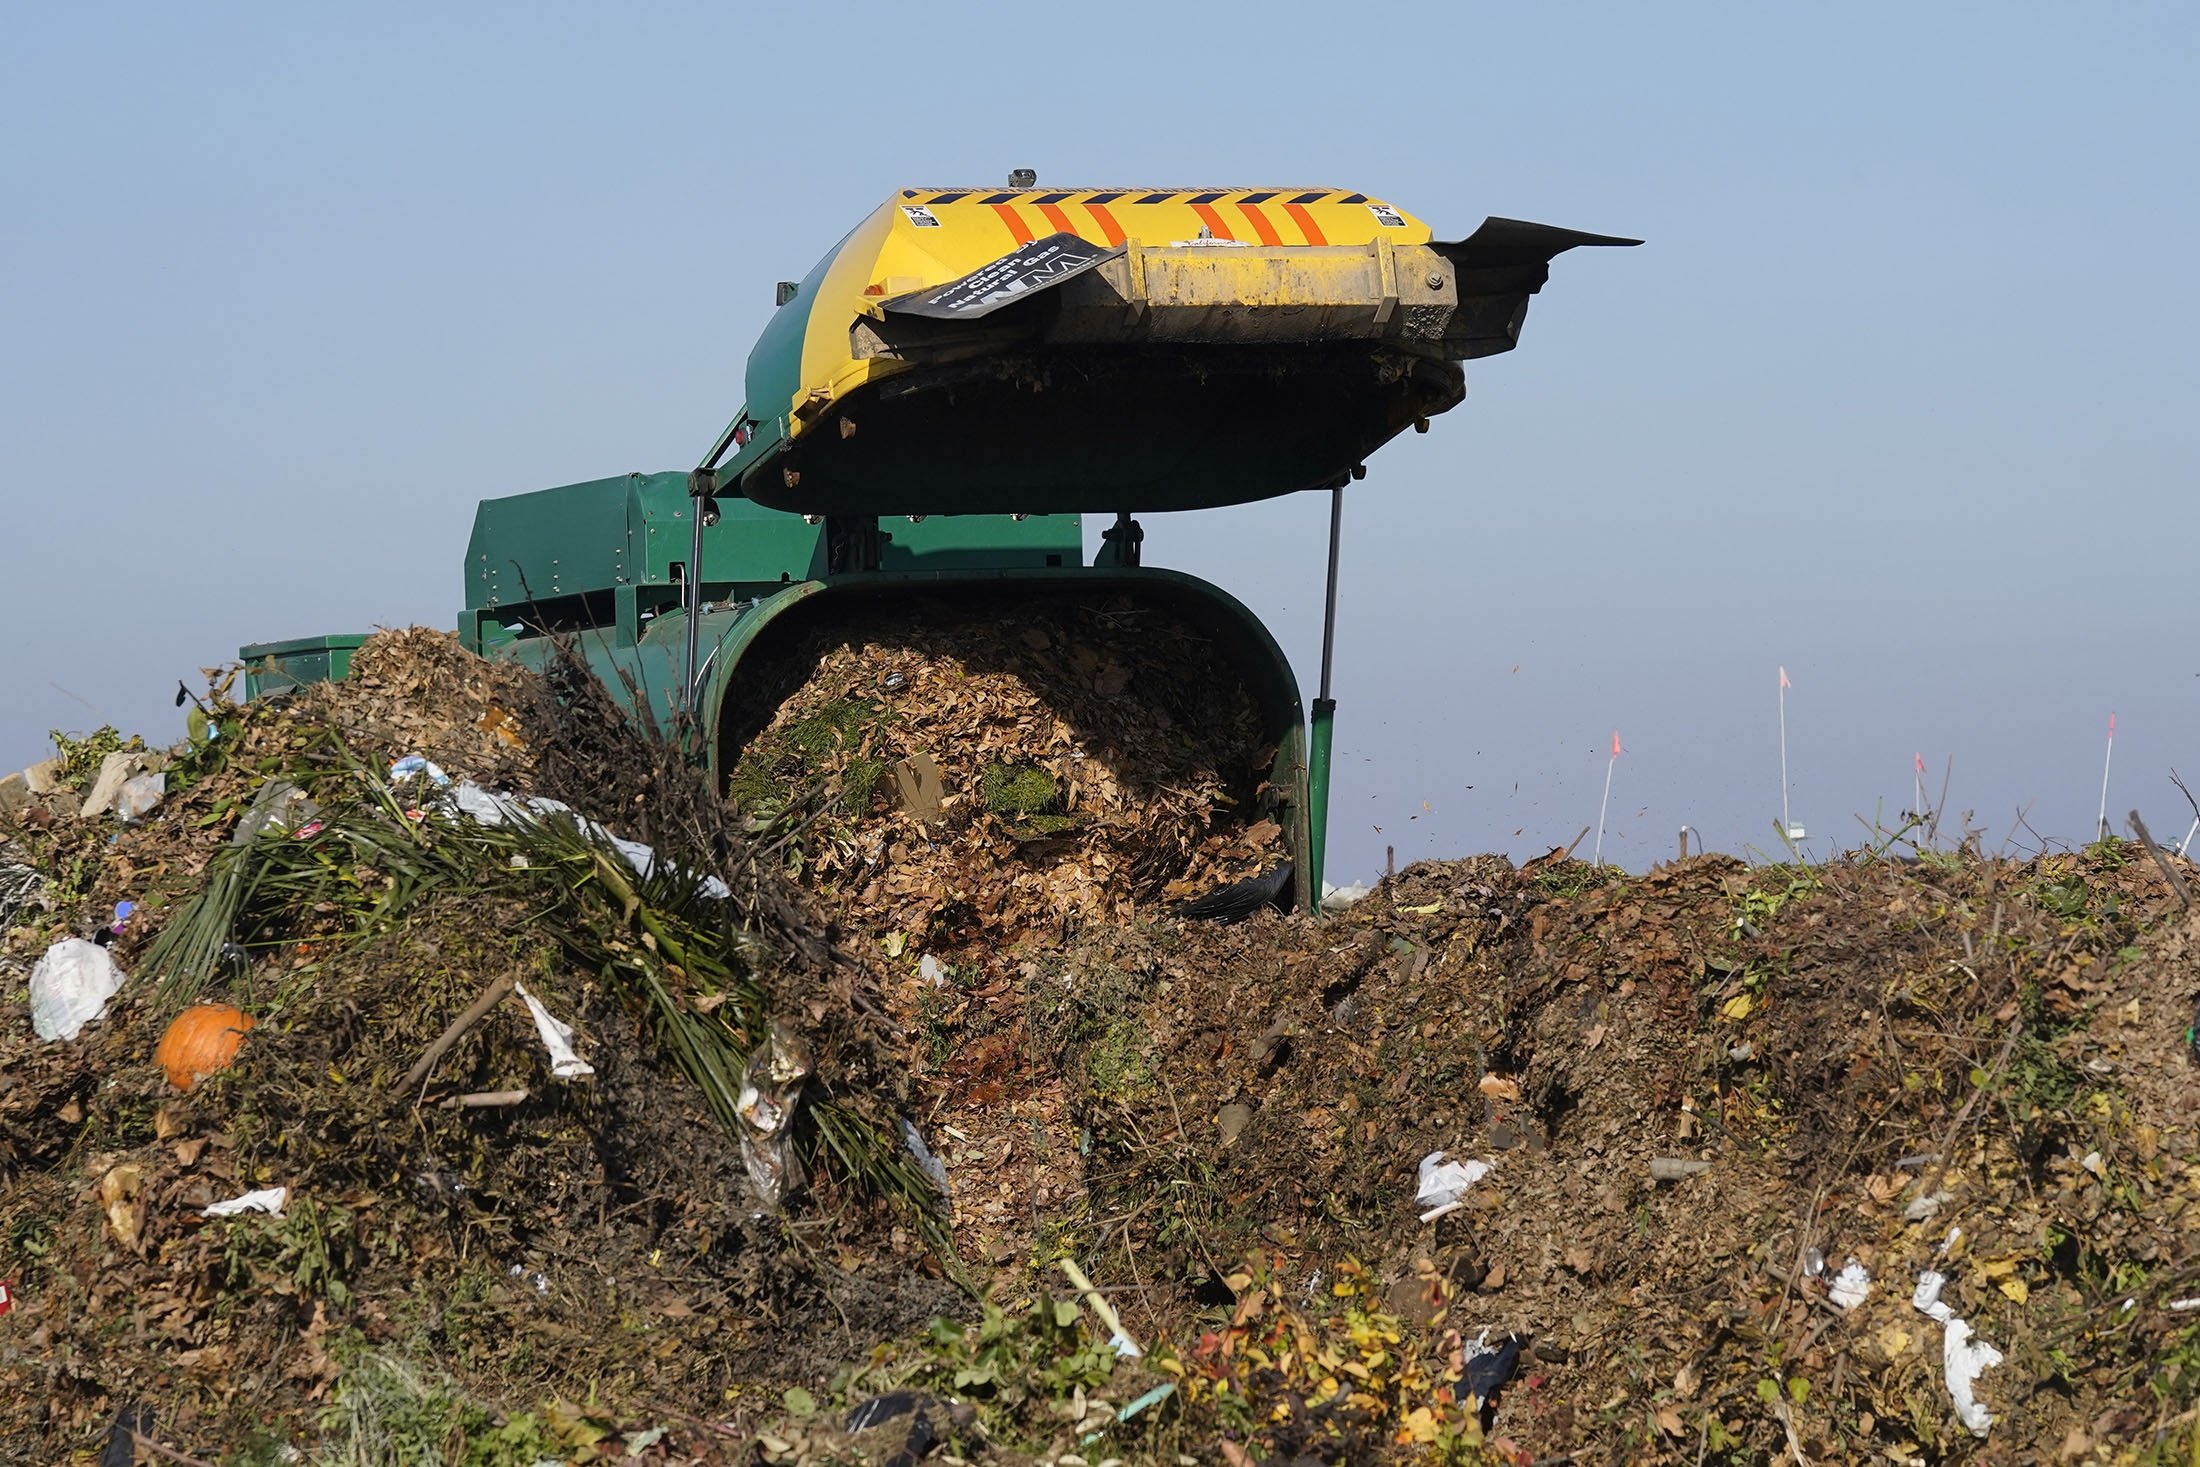 A truck unloads organic waste to be used for composting at the Anaerobic Composter Facility in Woodland, California, U.S., Nov. 30, 2021. (AP Photo)